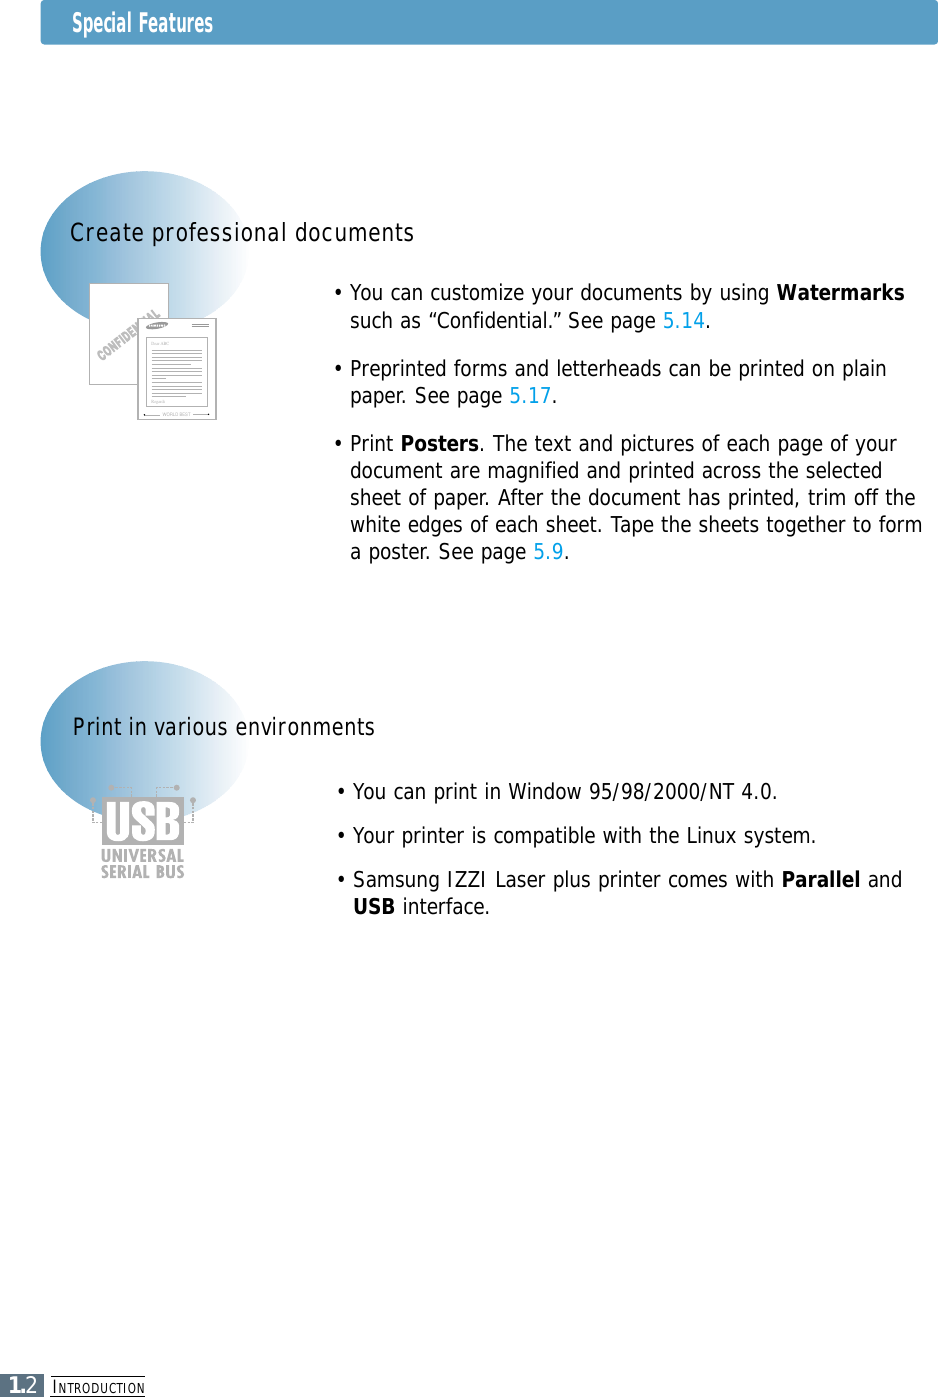 INTRODUCTION1.2• You can customize your documents by using Watermarkssuch as “Confidential.” See page 5.14.• Preprinted forms and letterheads can be printed on plainpaper. See page 5.17.• Print Posters. The text and pictures of each page of yourdocument are magnified and printed across the selectedsheet of paper. After the document has printed, trim off thewhite edges of each sheet. Tape the sheets together to forma poster. See page 5.9.Create professional documentsWORLD BESTDear ABCRegards• You can print in Window 95/98/2000/NT 4.0.• Your printer is compatible with the Linux system. • Samsung IZZI Laser plus printer comes with Parallel andUSB interface.Print in various environmentsSpecial Features